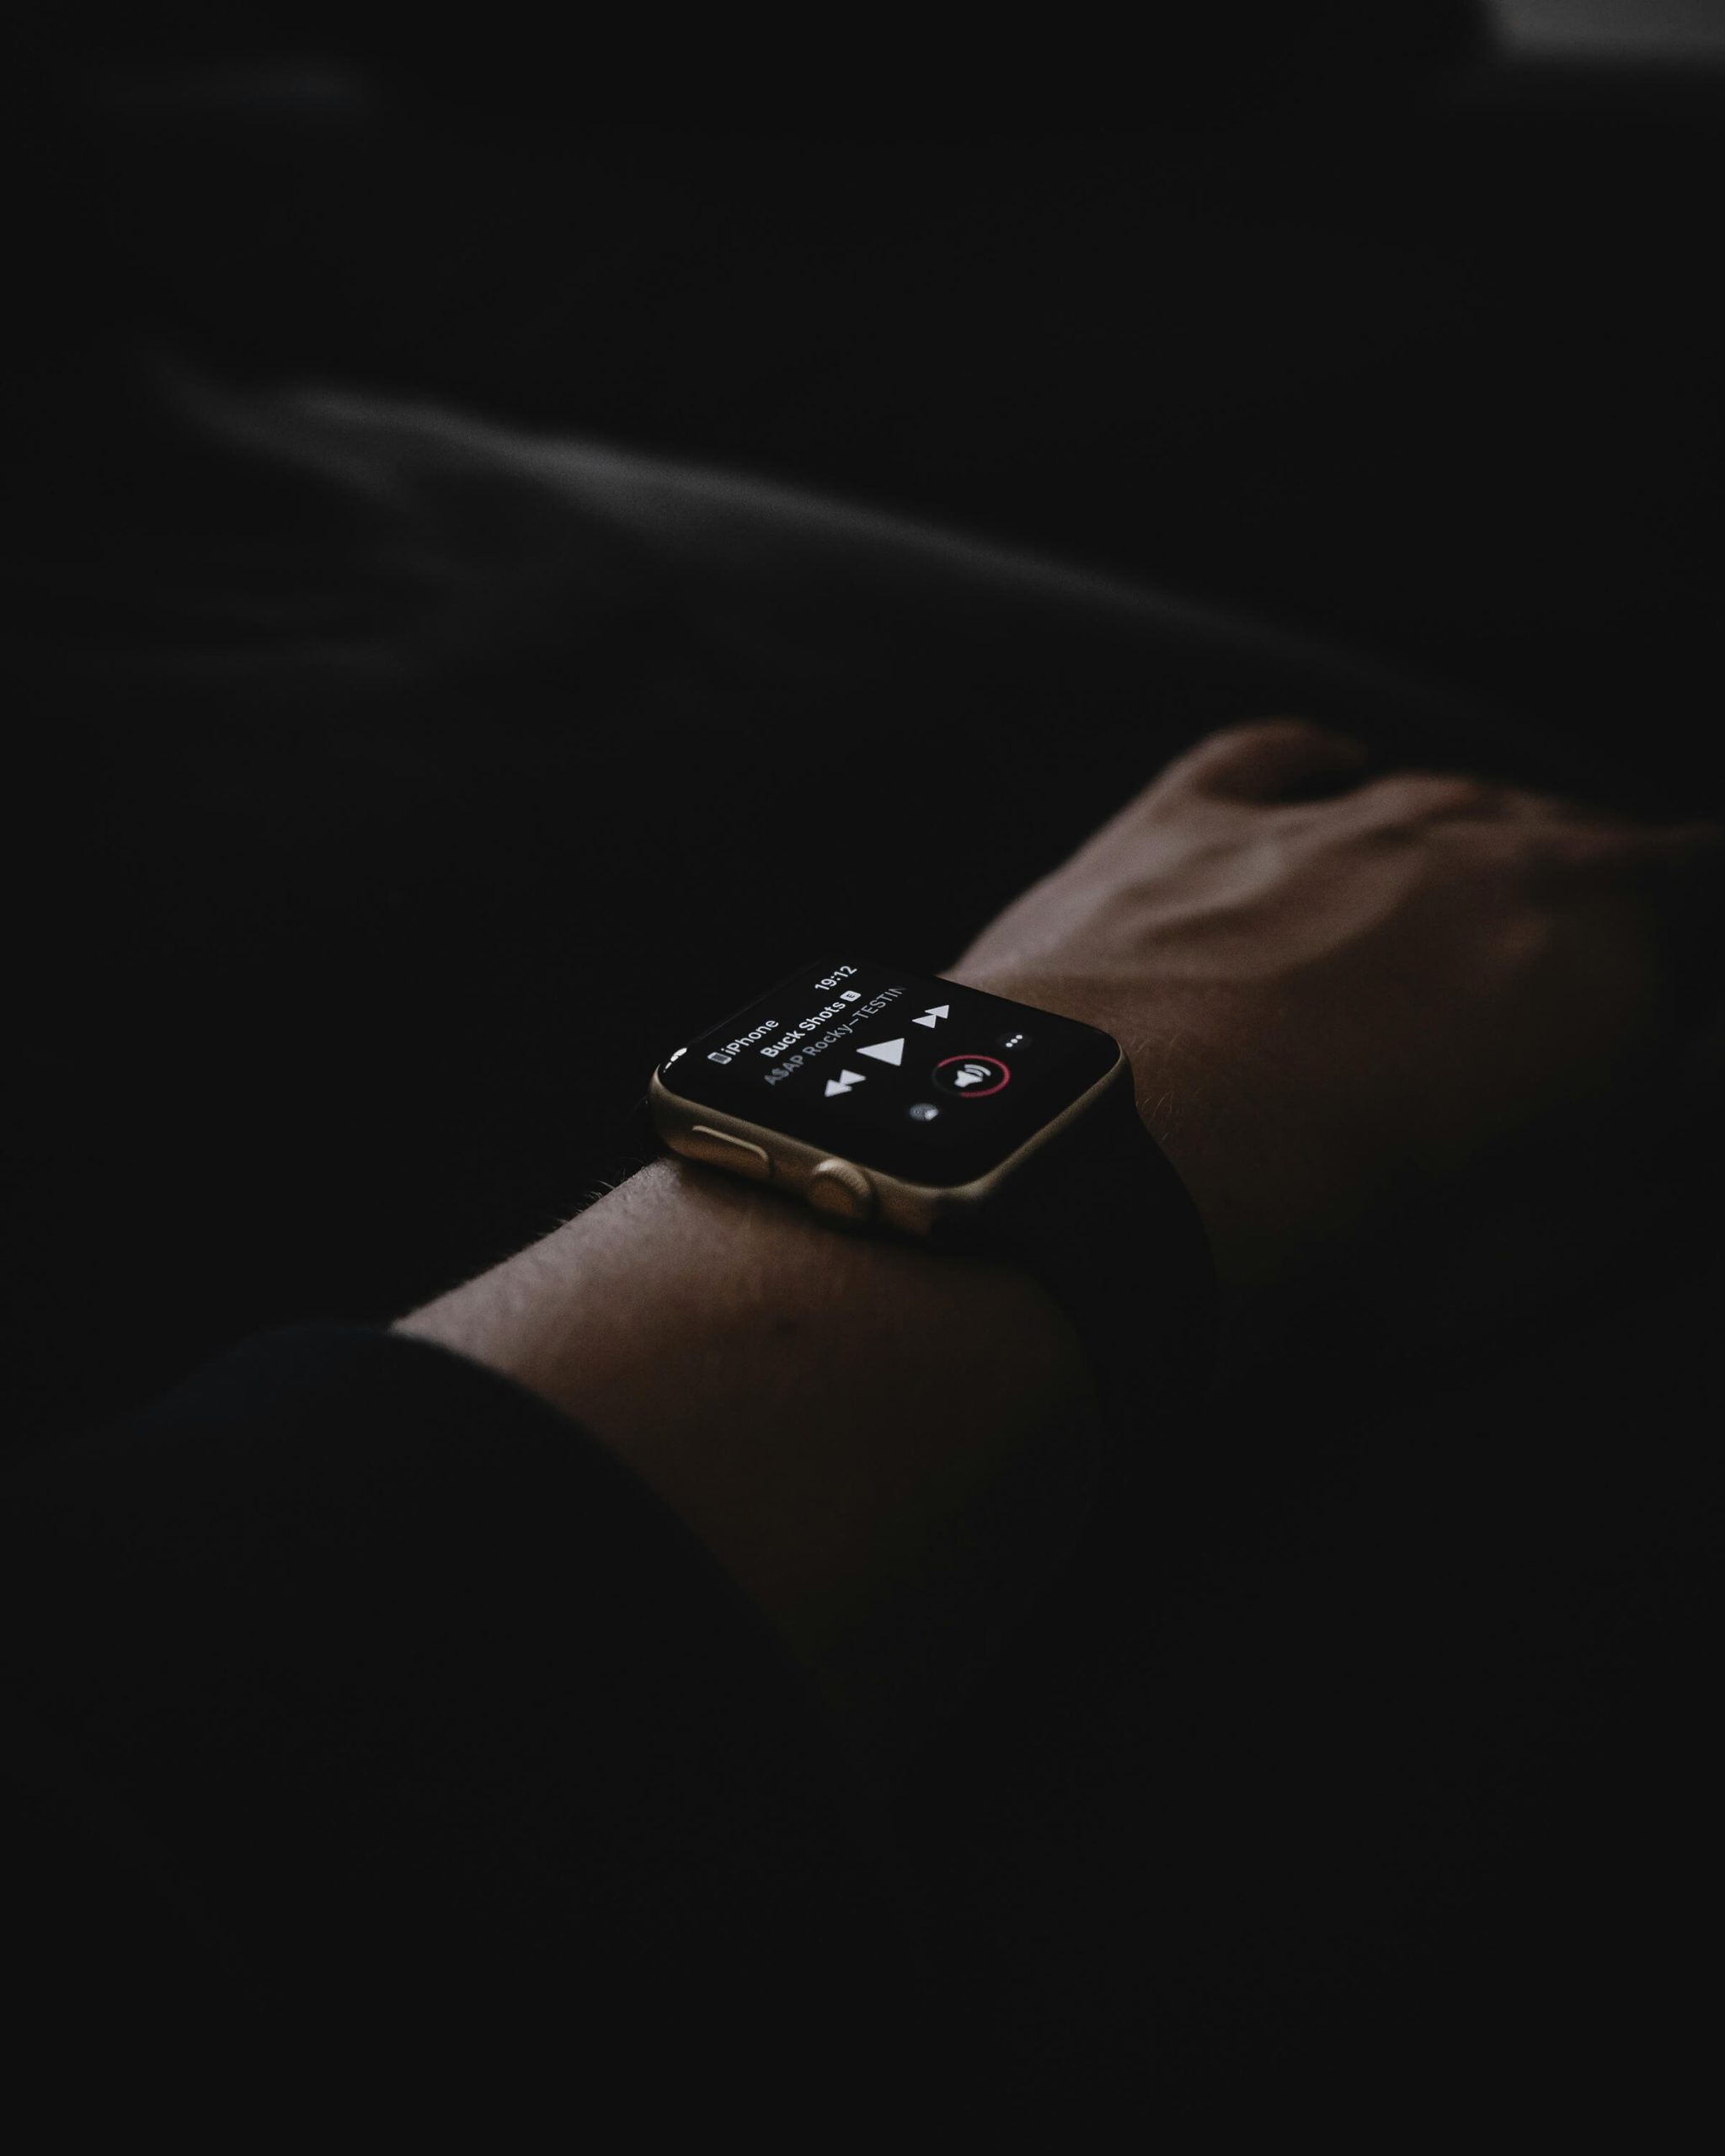 digital product branding strategy for mobile and smart watch apps